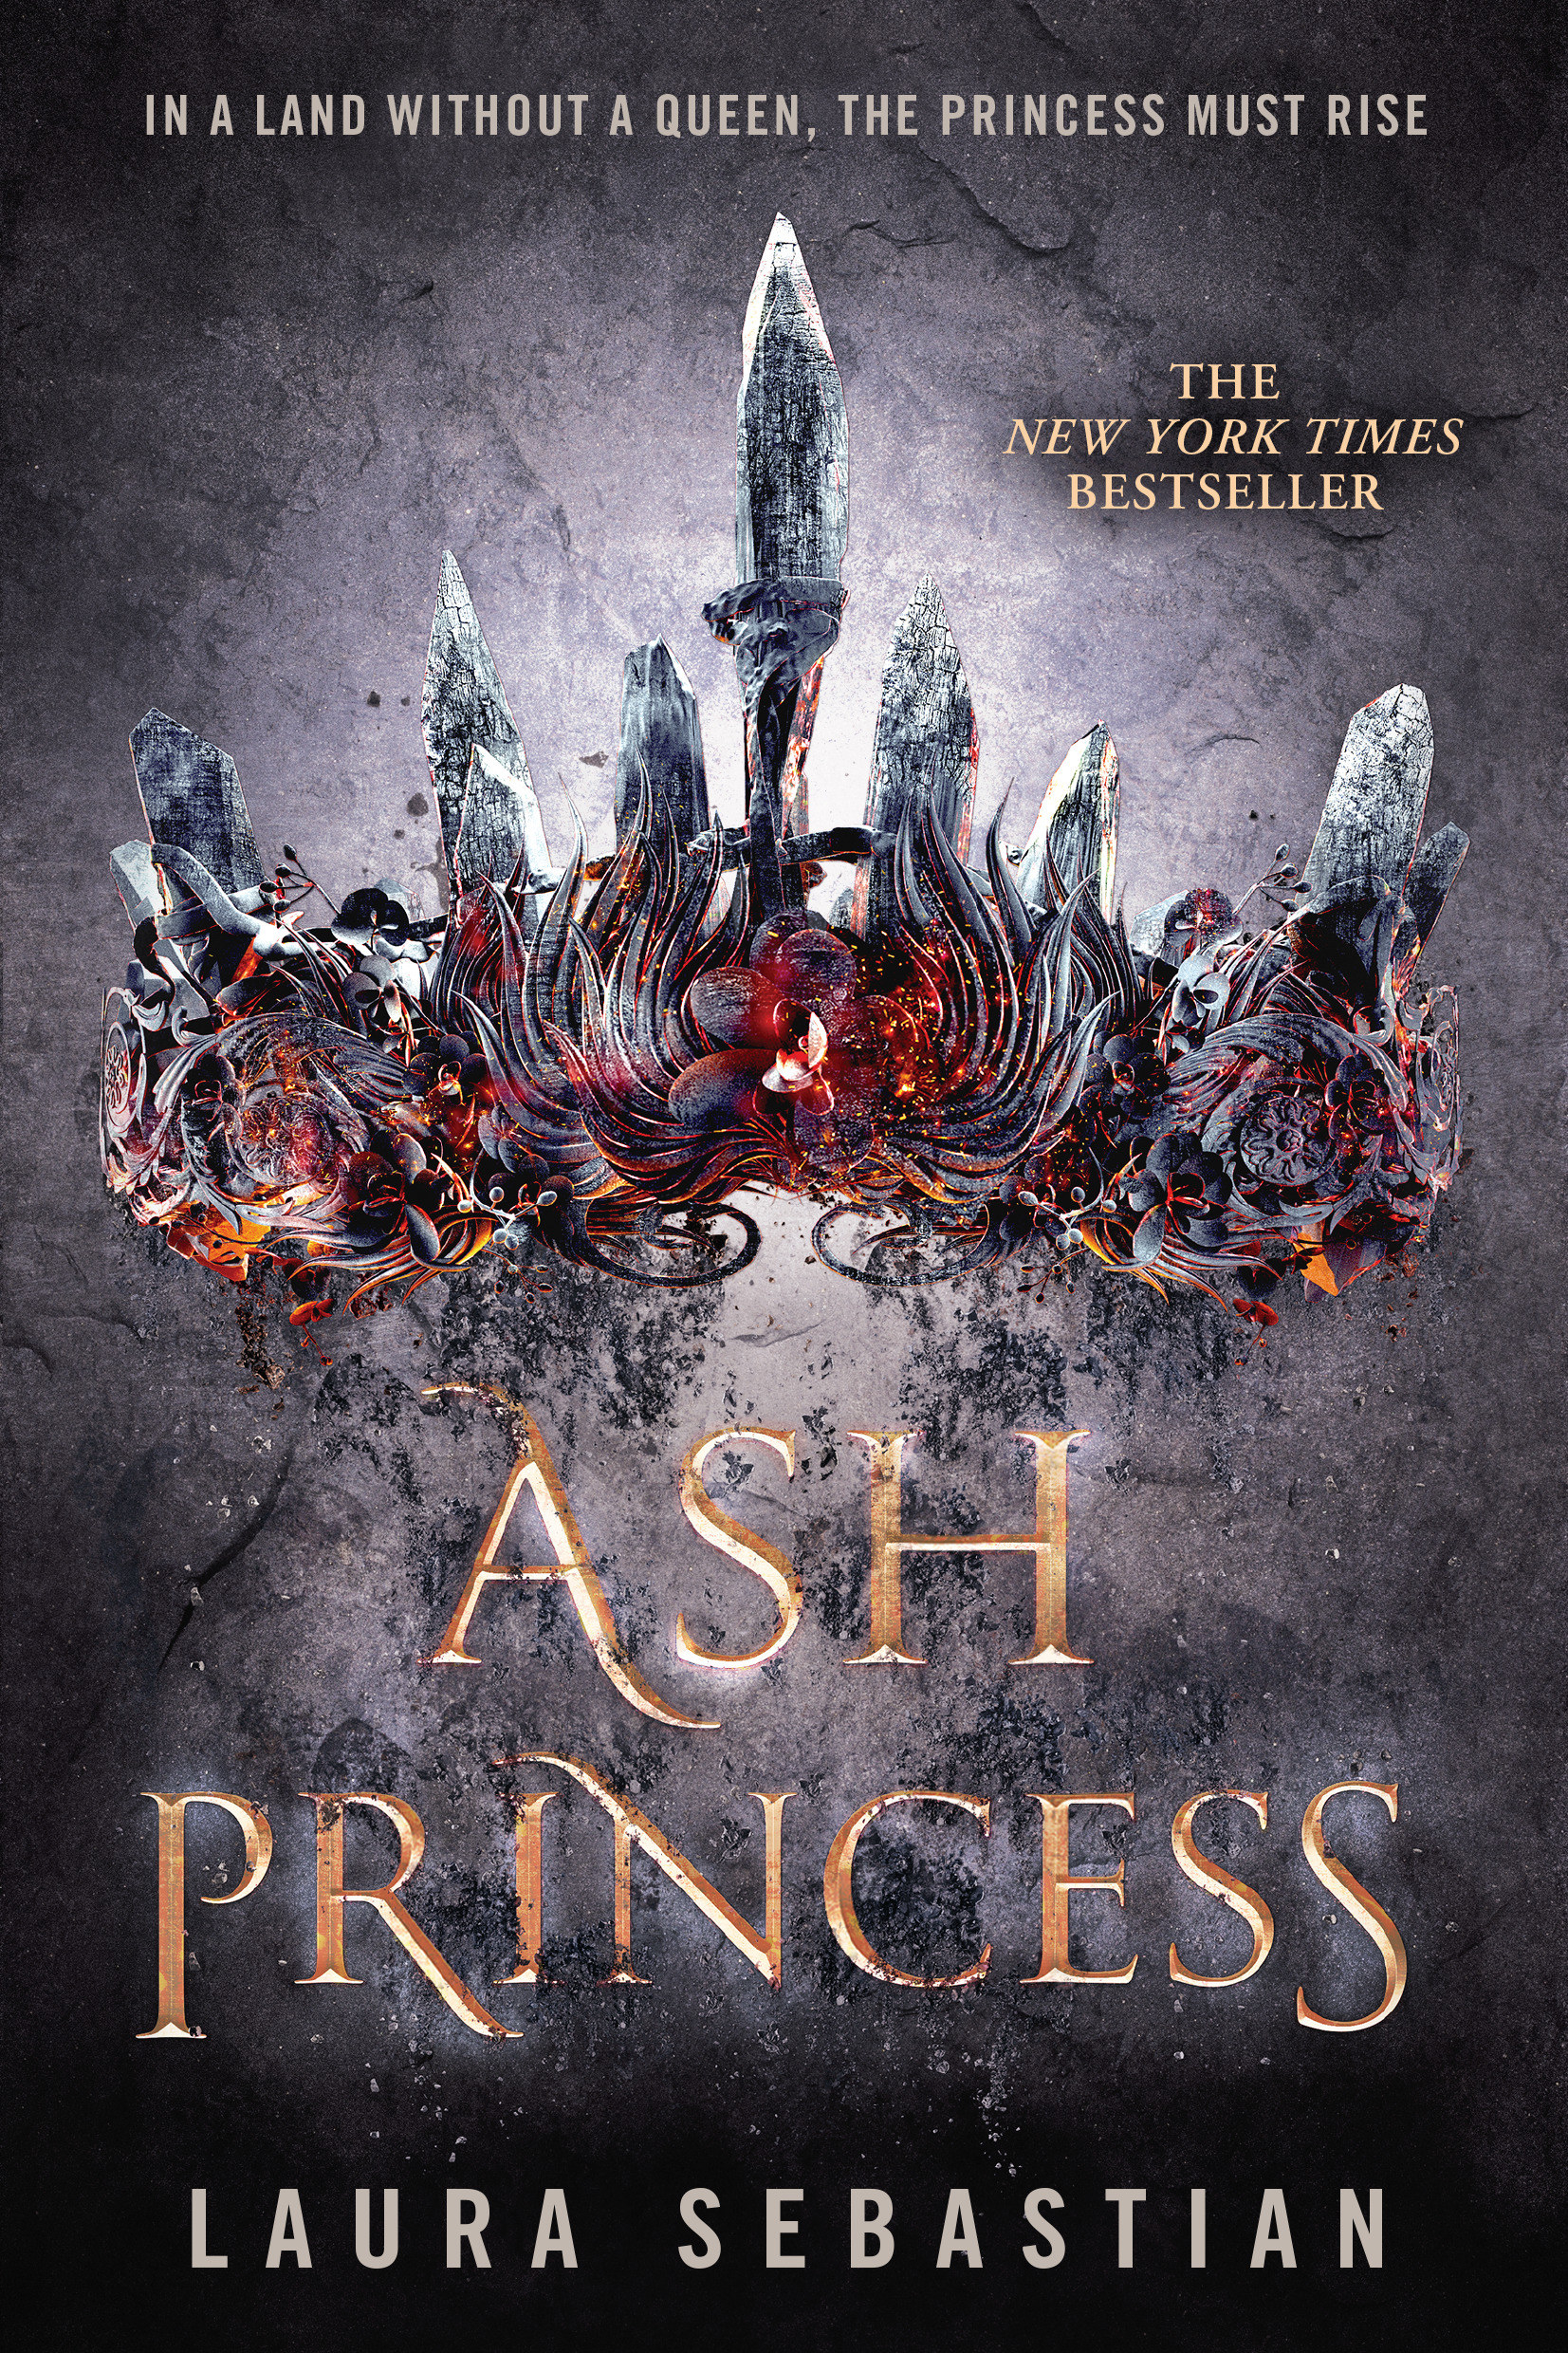 The cover of &quot;Ash Princess,&quot; which has an illustration of a crown on an ashy background.